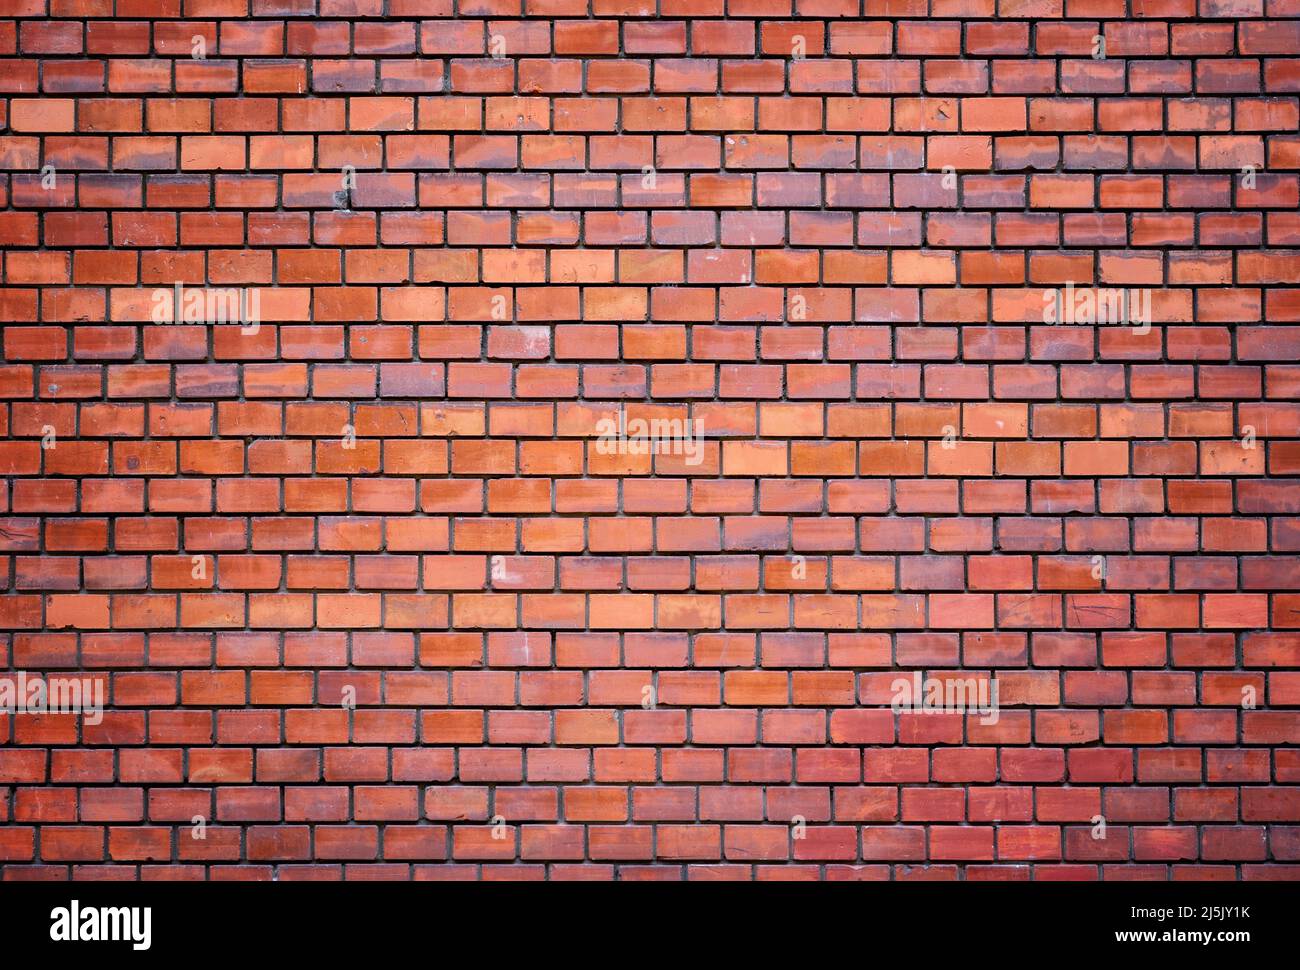 Old red brick wall texture background Stock Photo